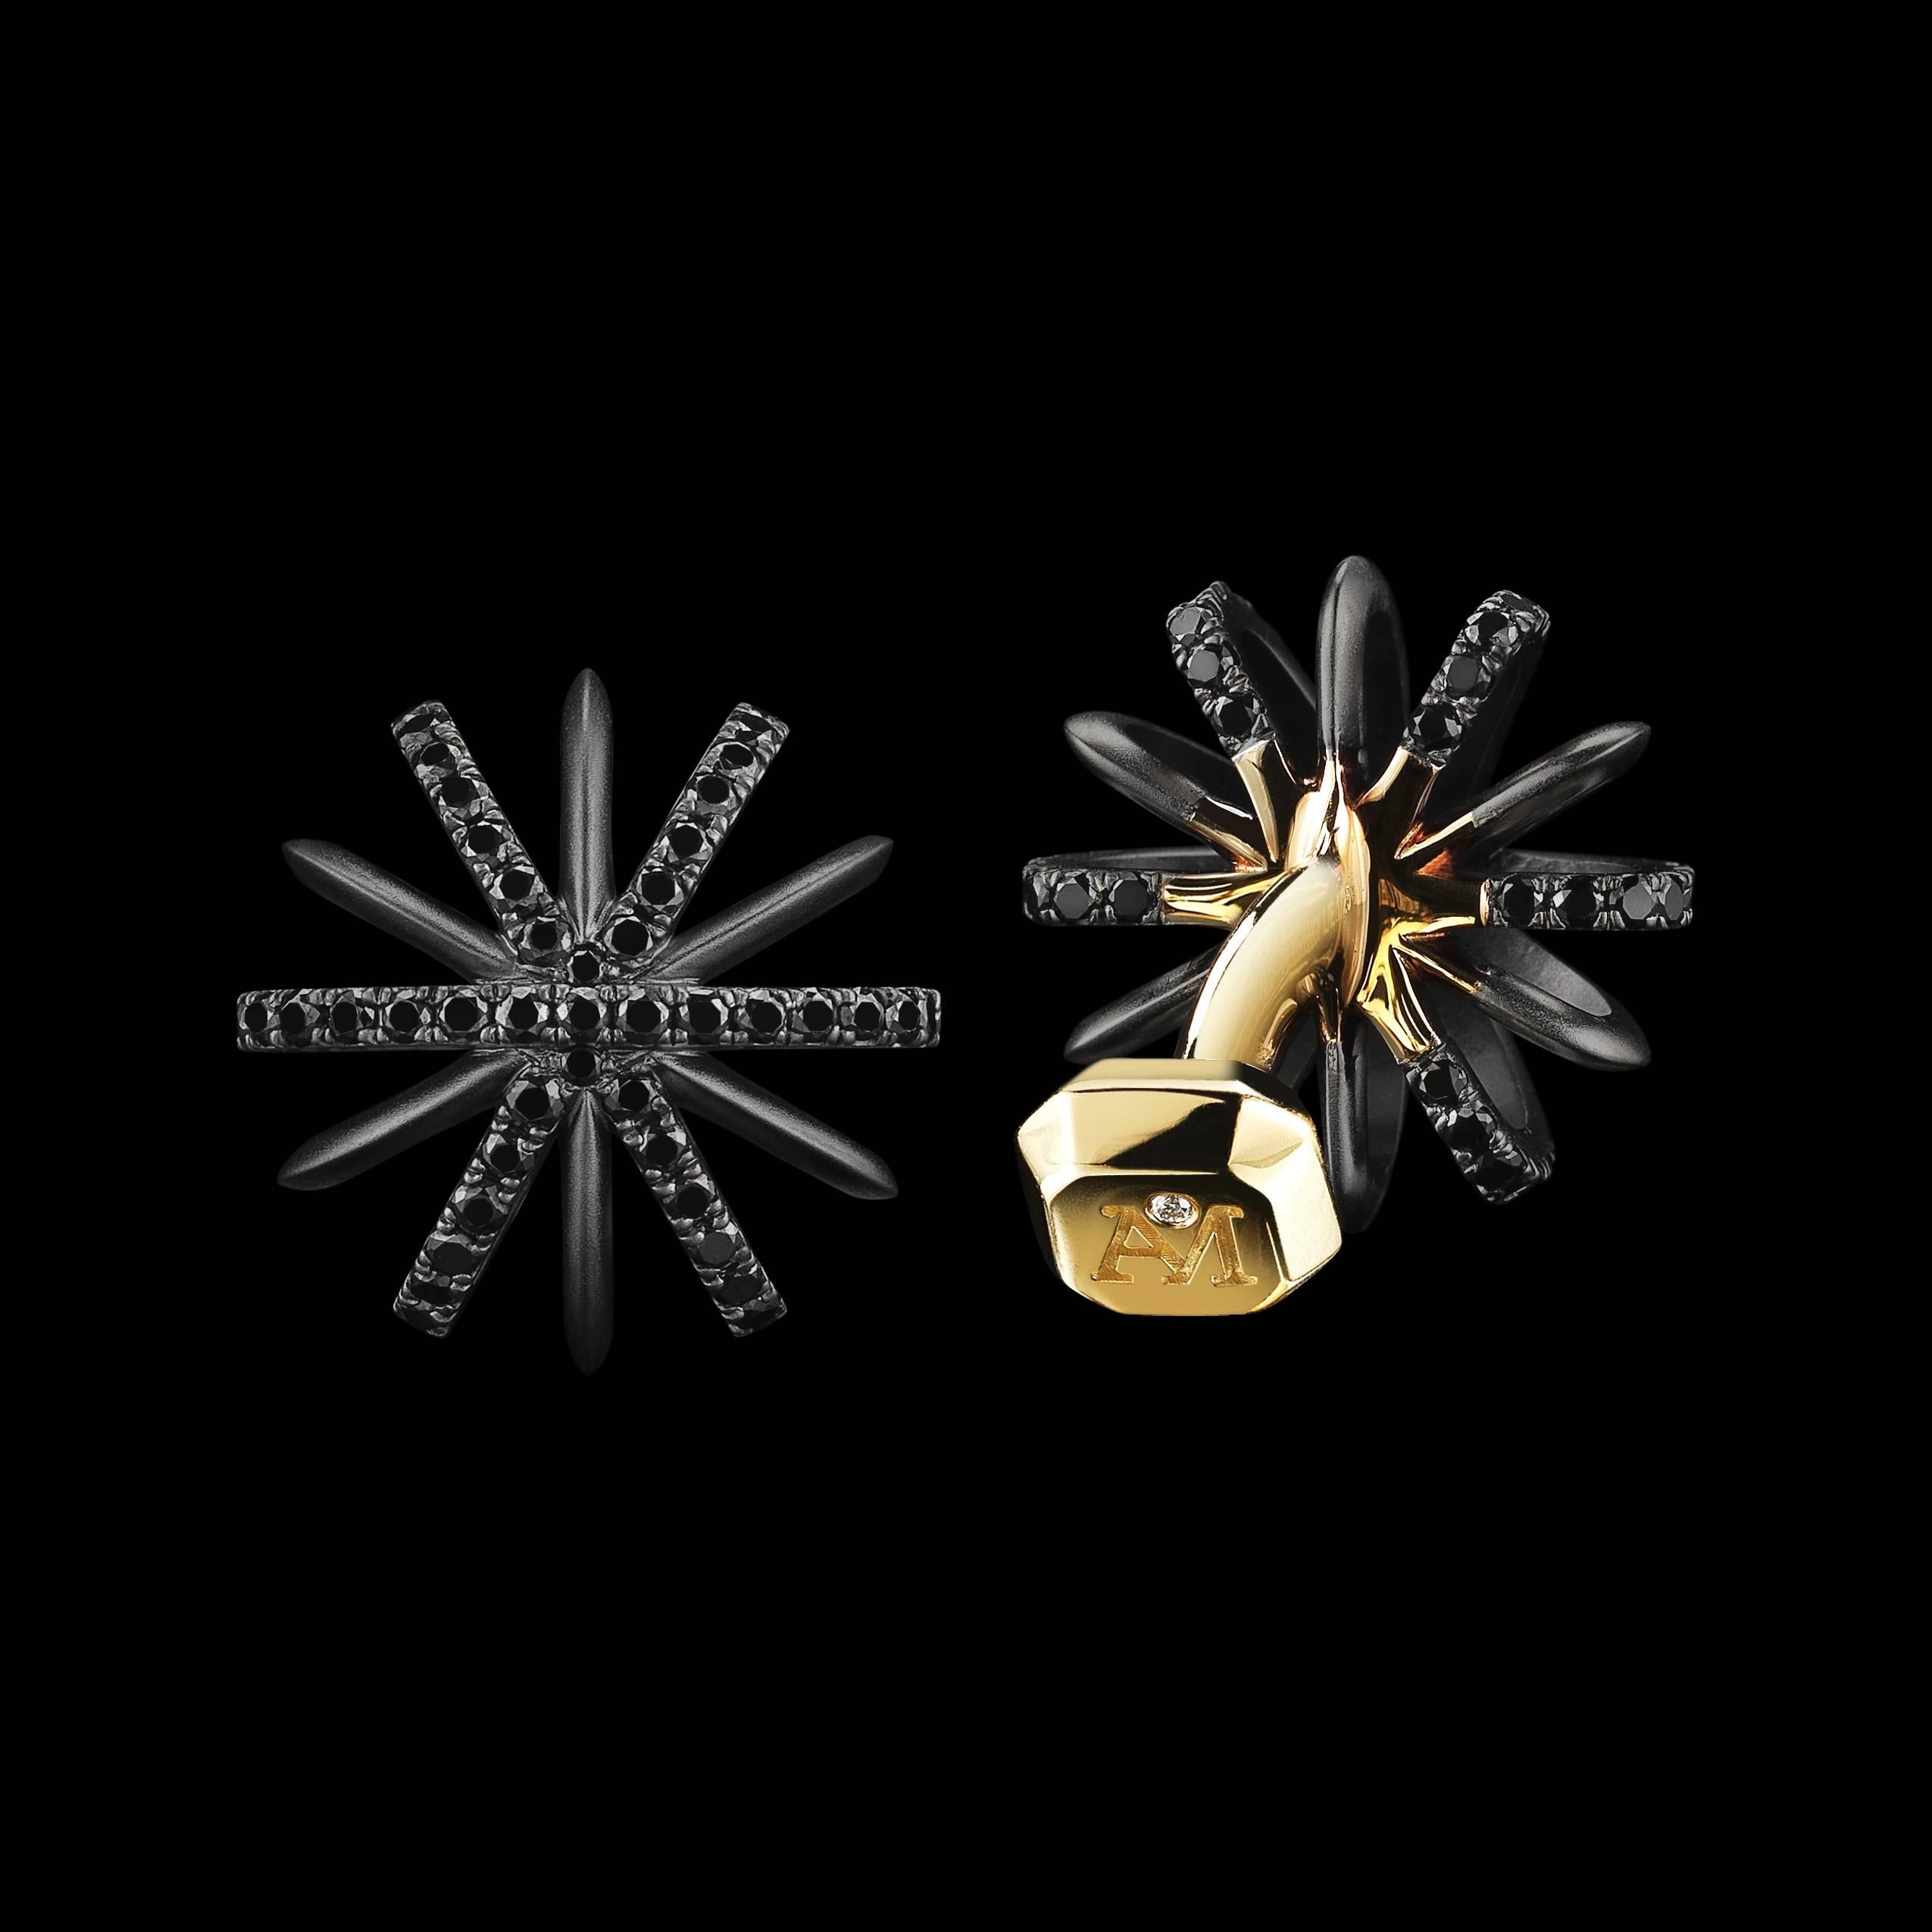 Alexandra Mor signature Black Diamond snowflake cufflinks feature one hundred thirty Diamonds set in Palladium and 18 karat yellow gold with a noir- satin finish,and Alexandra Mor logo. Limited edition of 10. Signed by artist. Crafted in the USA.